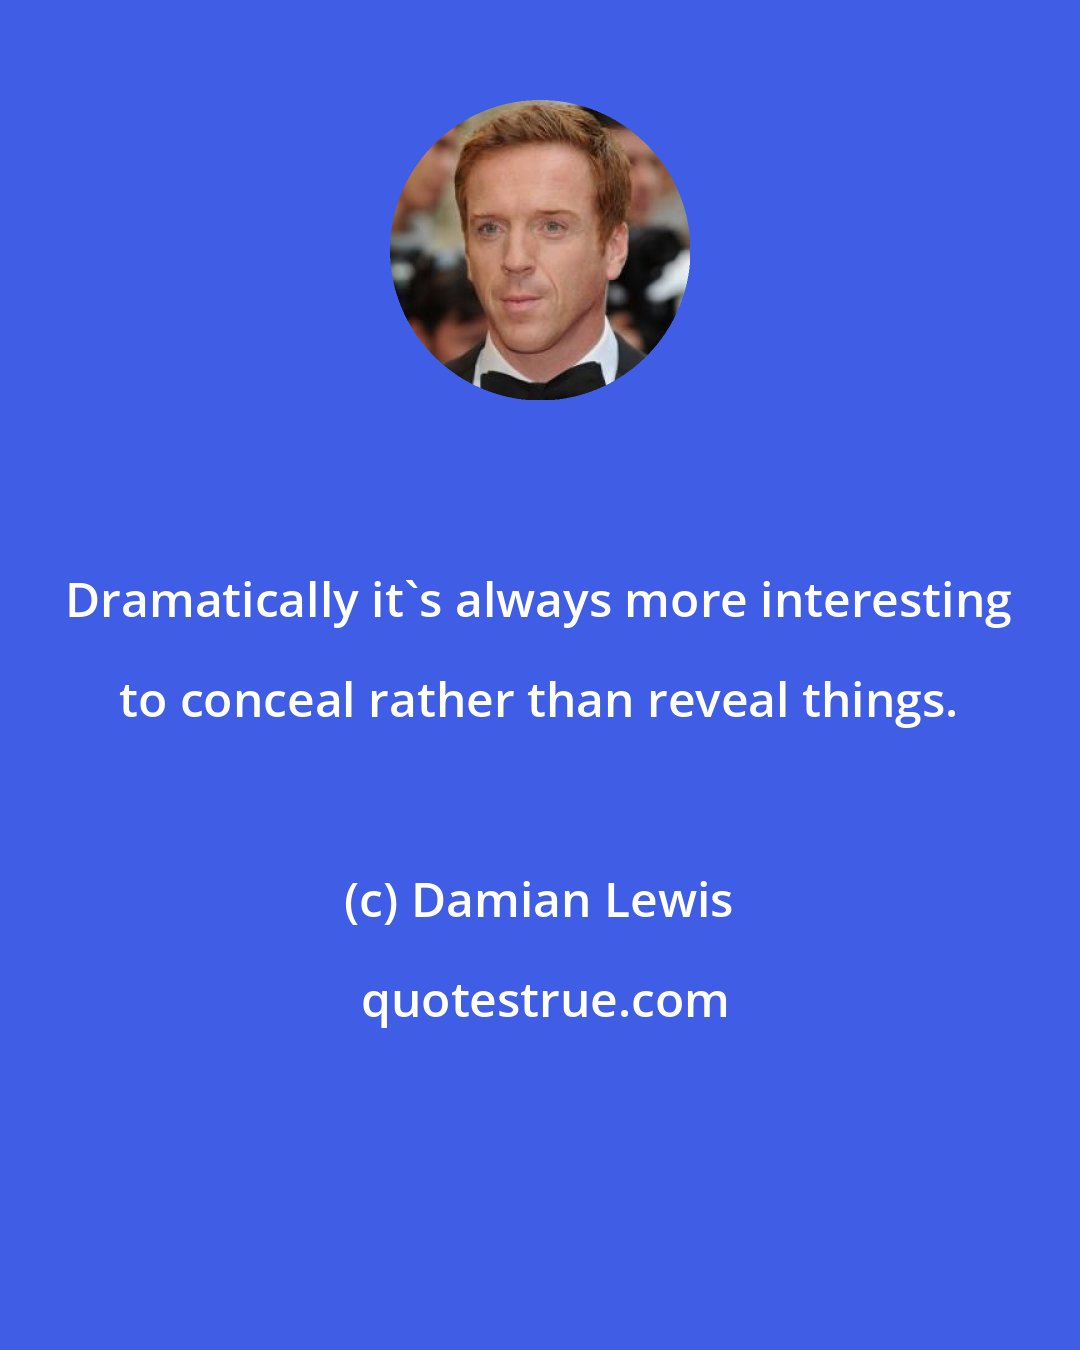 Damian Lewis: Dramatically it's always more interesting to conceal rather than reveal things.